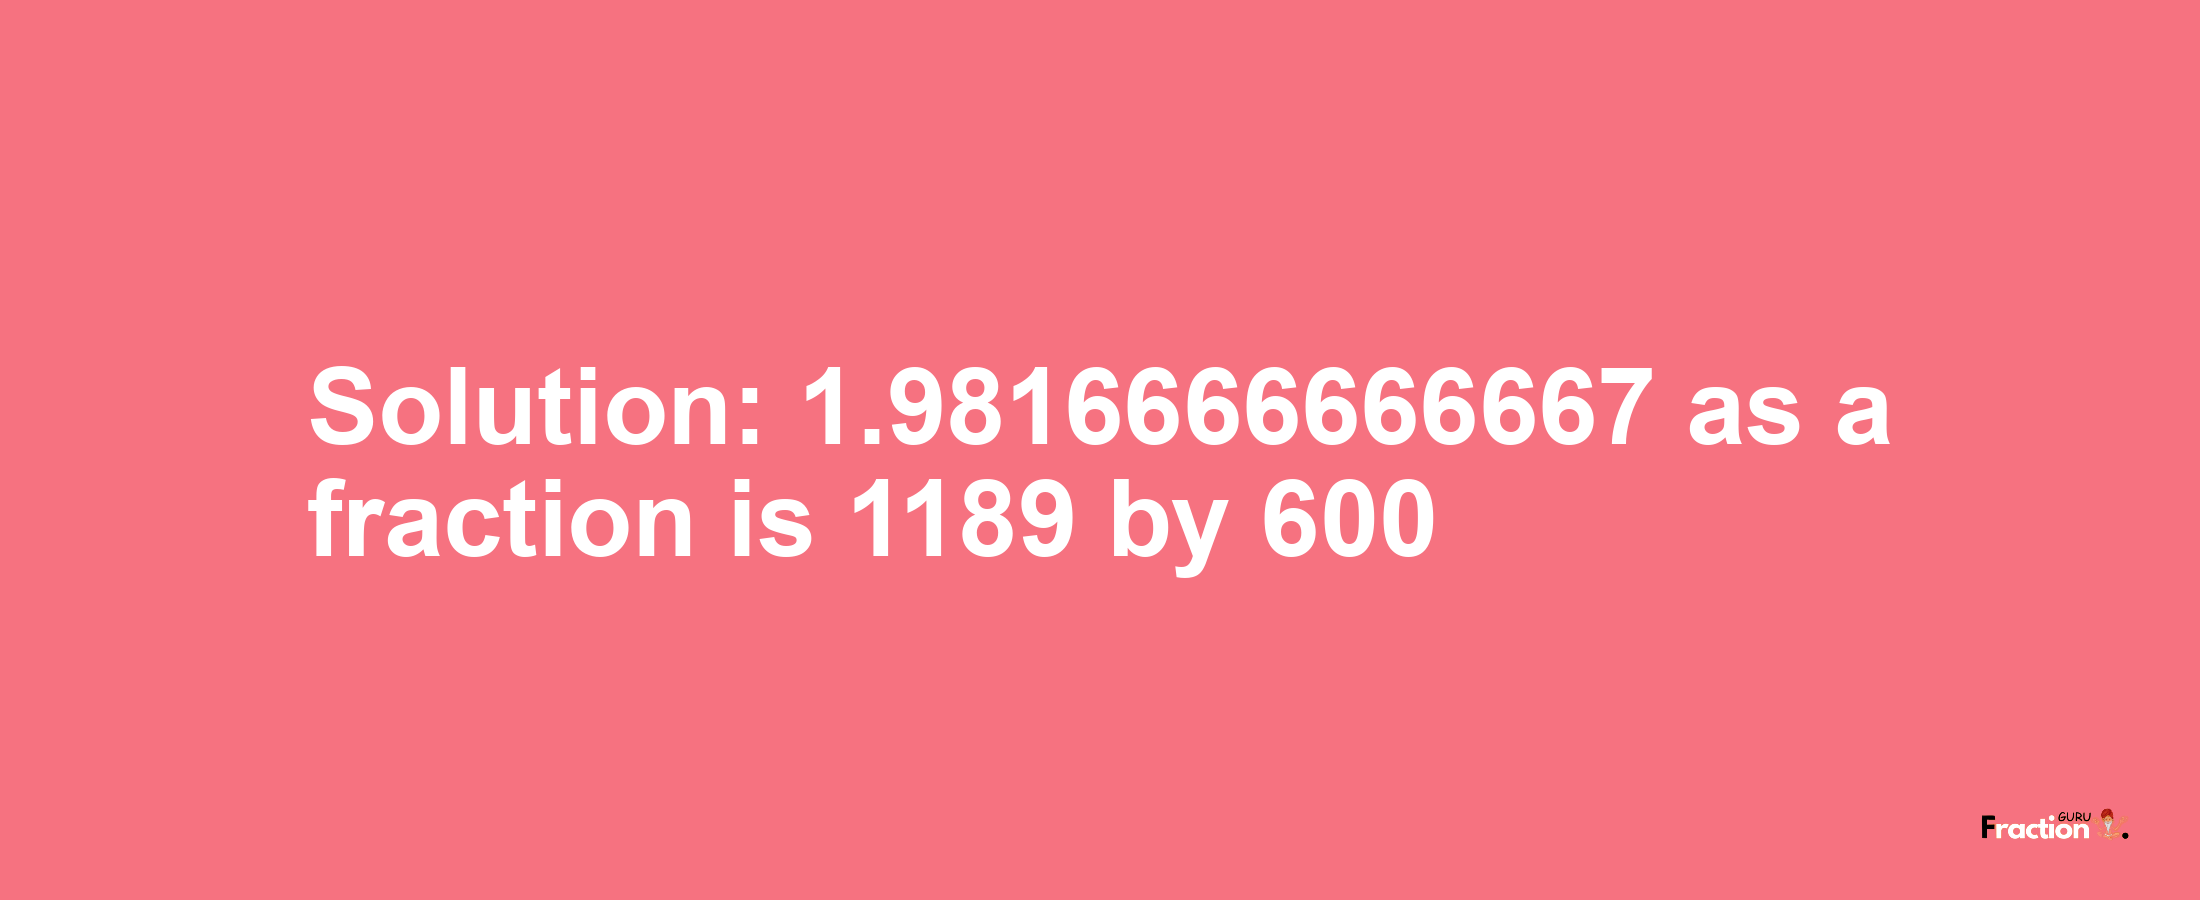 Solution:1.9816666666667 as a fraction is 1189/600